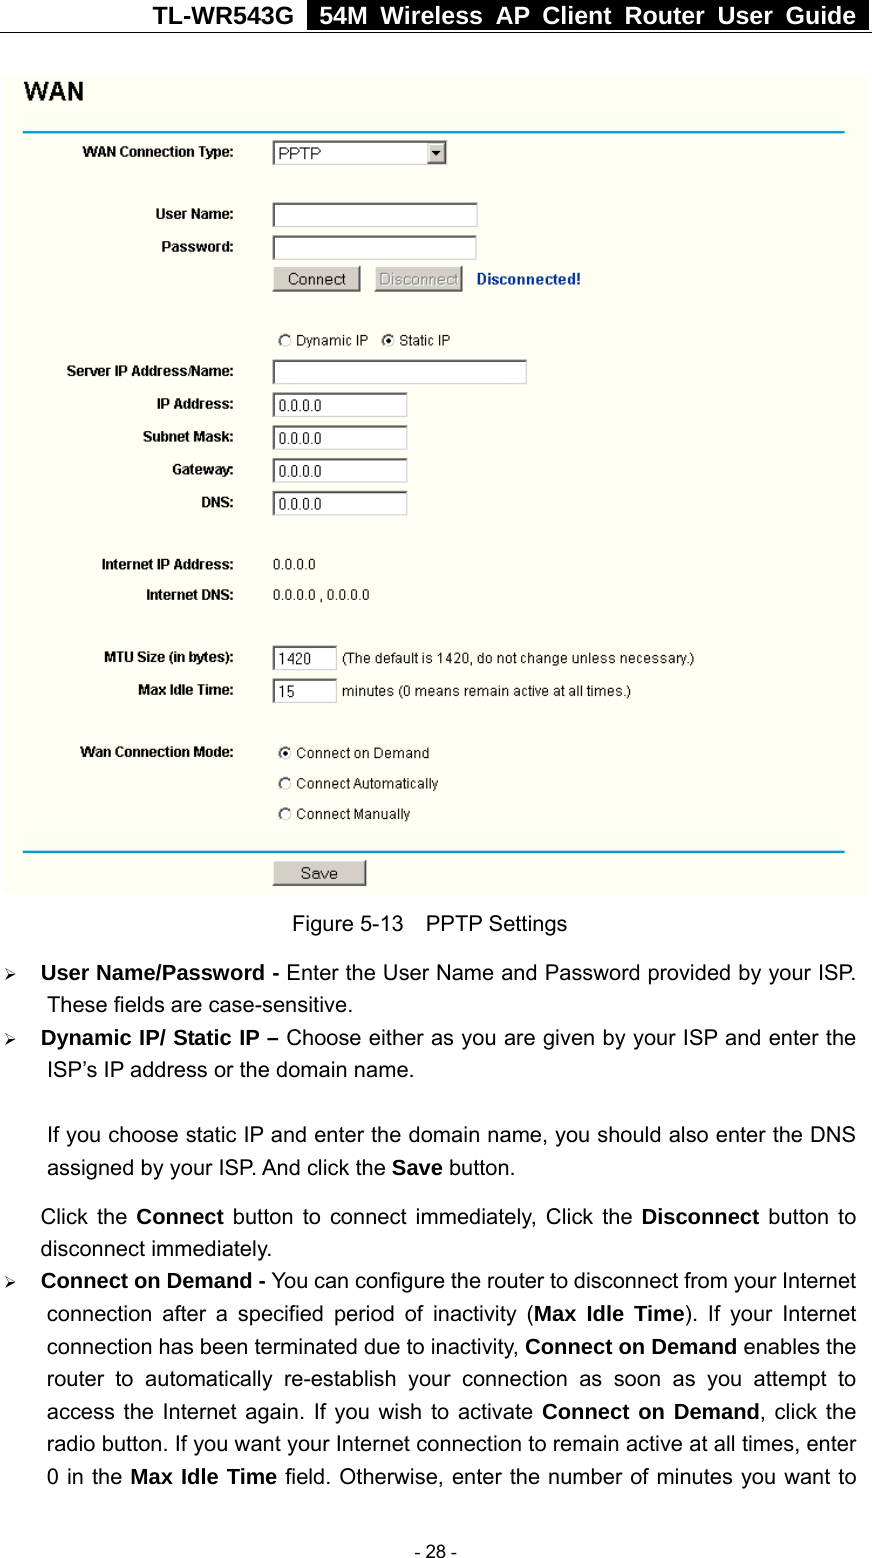 TL-WR543G   54M Wireless AP Client Router User Guide   Figure 5-13  PPTP Settings ¾ User Name/Password - Enter the User Name and Password provided by your ISP. These fields are case-sensitive. ¾ Dynamic IP/ Static IP – Choose either as you are given by your ISP and enter the ISP’s IP address or the domain name.  If you choose static IP and enter the domain name, you should also enter the DNS assigned by your ISP. And click the Save button. Click the Connect button to connect immediately, Click the Disconnect button to disconnect immediately. ¾ Connect on Demand - You can configure the router to disconnect from your Internet connection after a specified period of inactivity (Max Idle Time). If your Internet connection has been terminated due to inactivity, Connect on Demand enables the router to automatically re-establish your connection as soon as you attempt to access the Internet again. If you wish to activate Connect on Demand, click the radio button. If you want your Internet connection to remain active at all times, enter 0 in the Max Idle Time field. Otherwise, enter the number of minutes you want to  - 28 - 